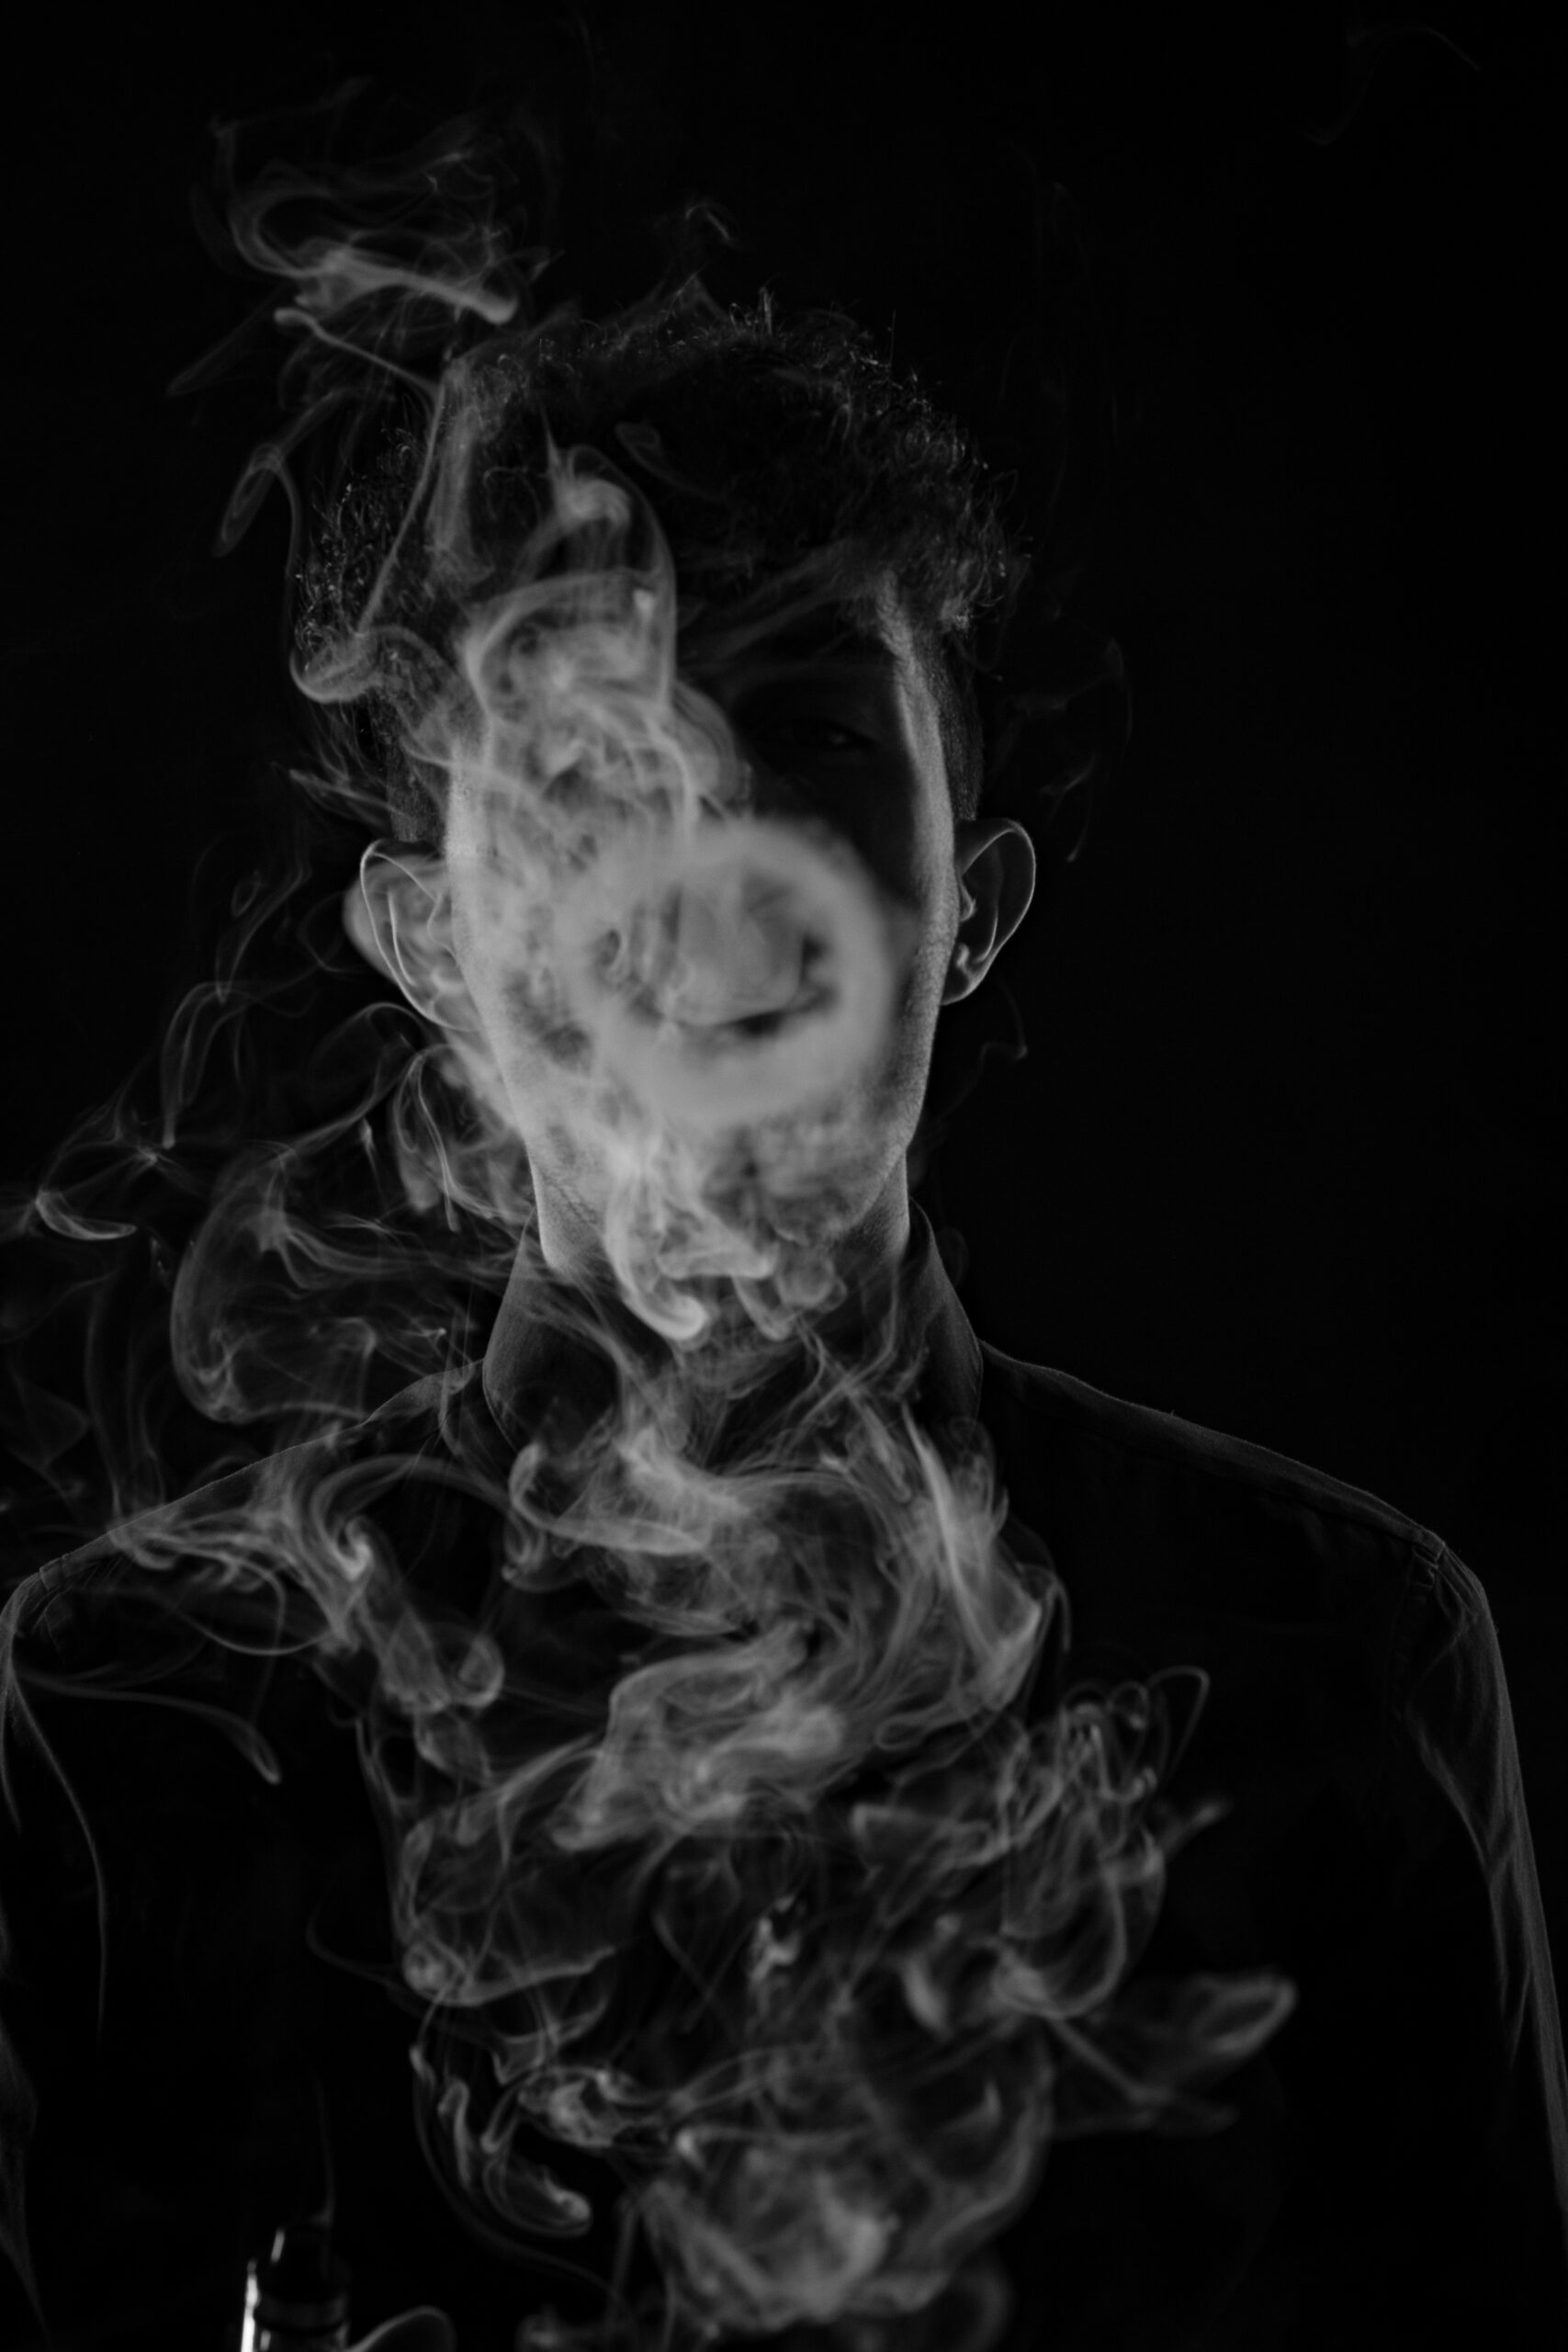 A person obscured by swirls of smoke against a dark background.